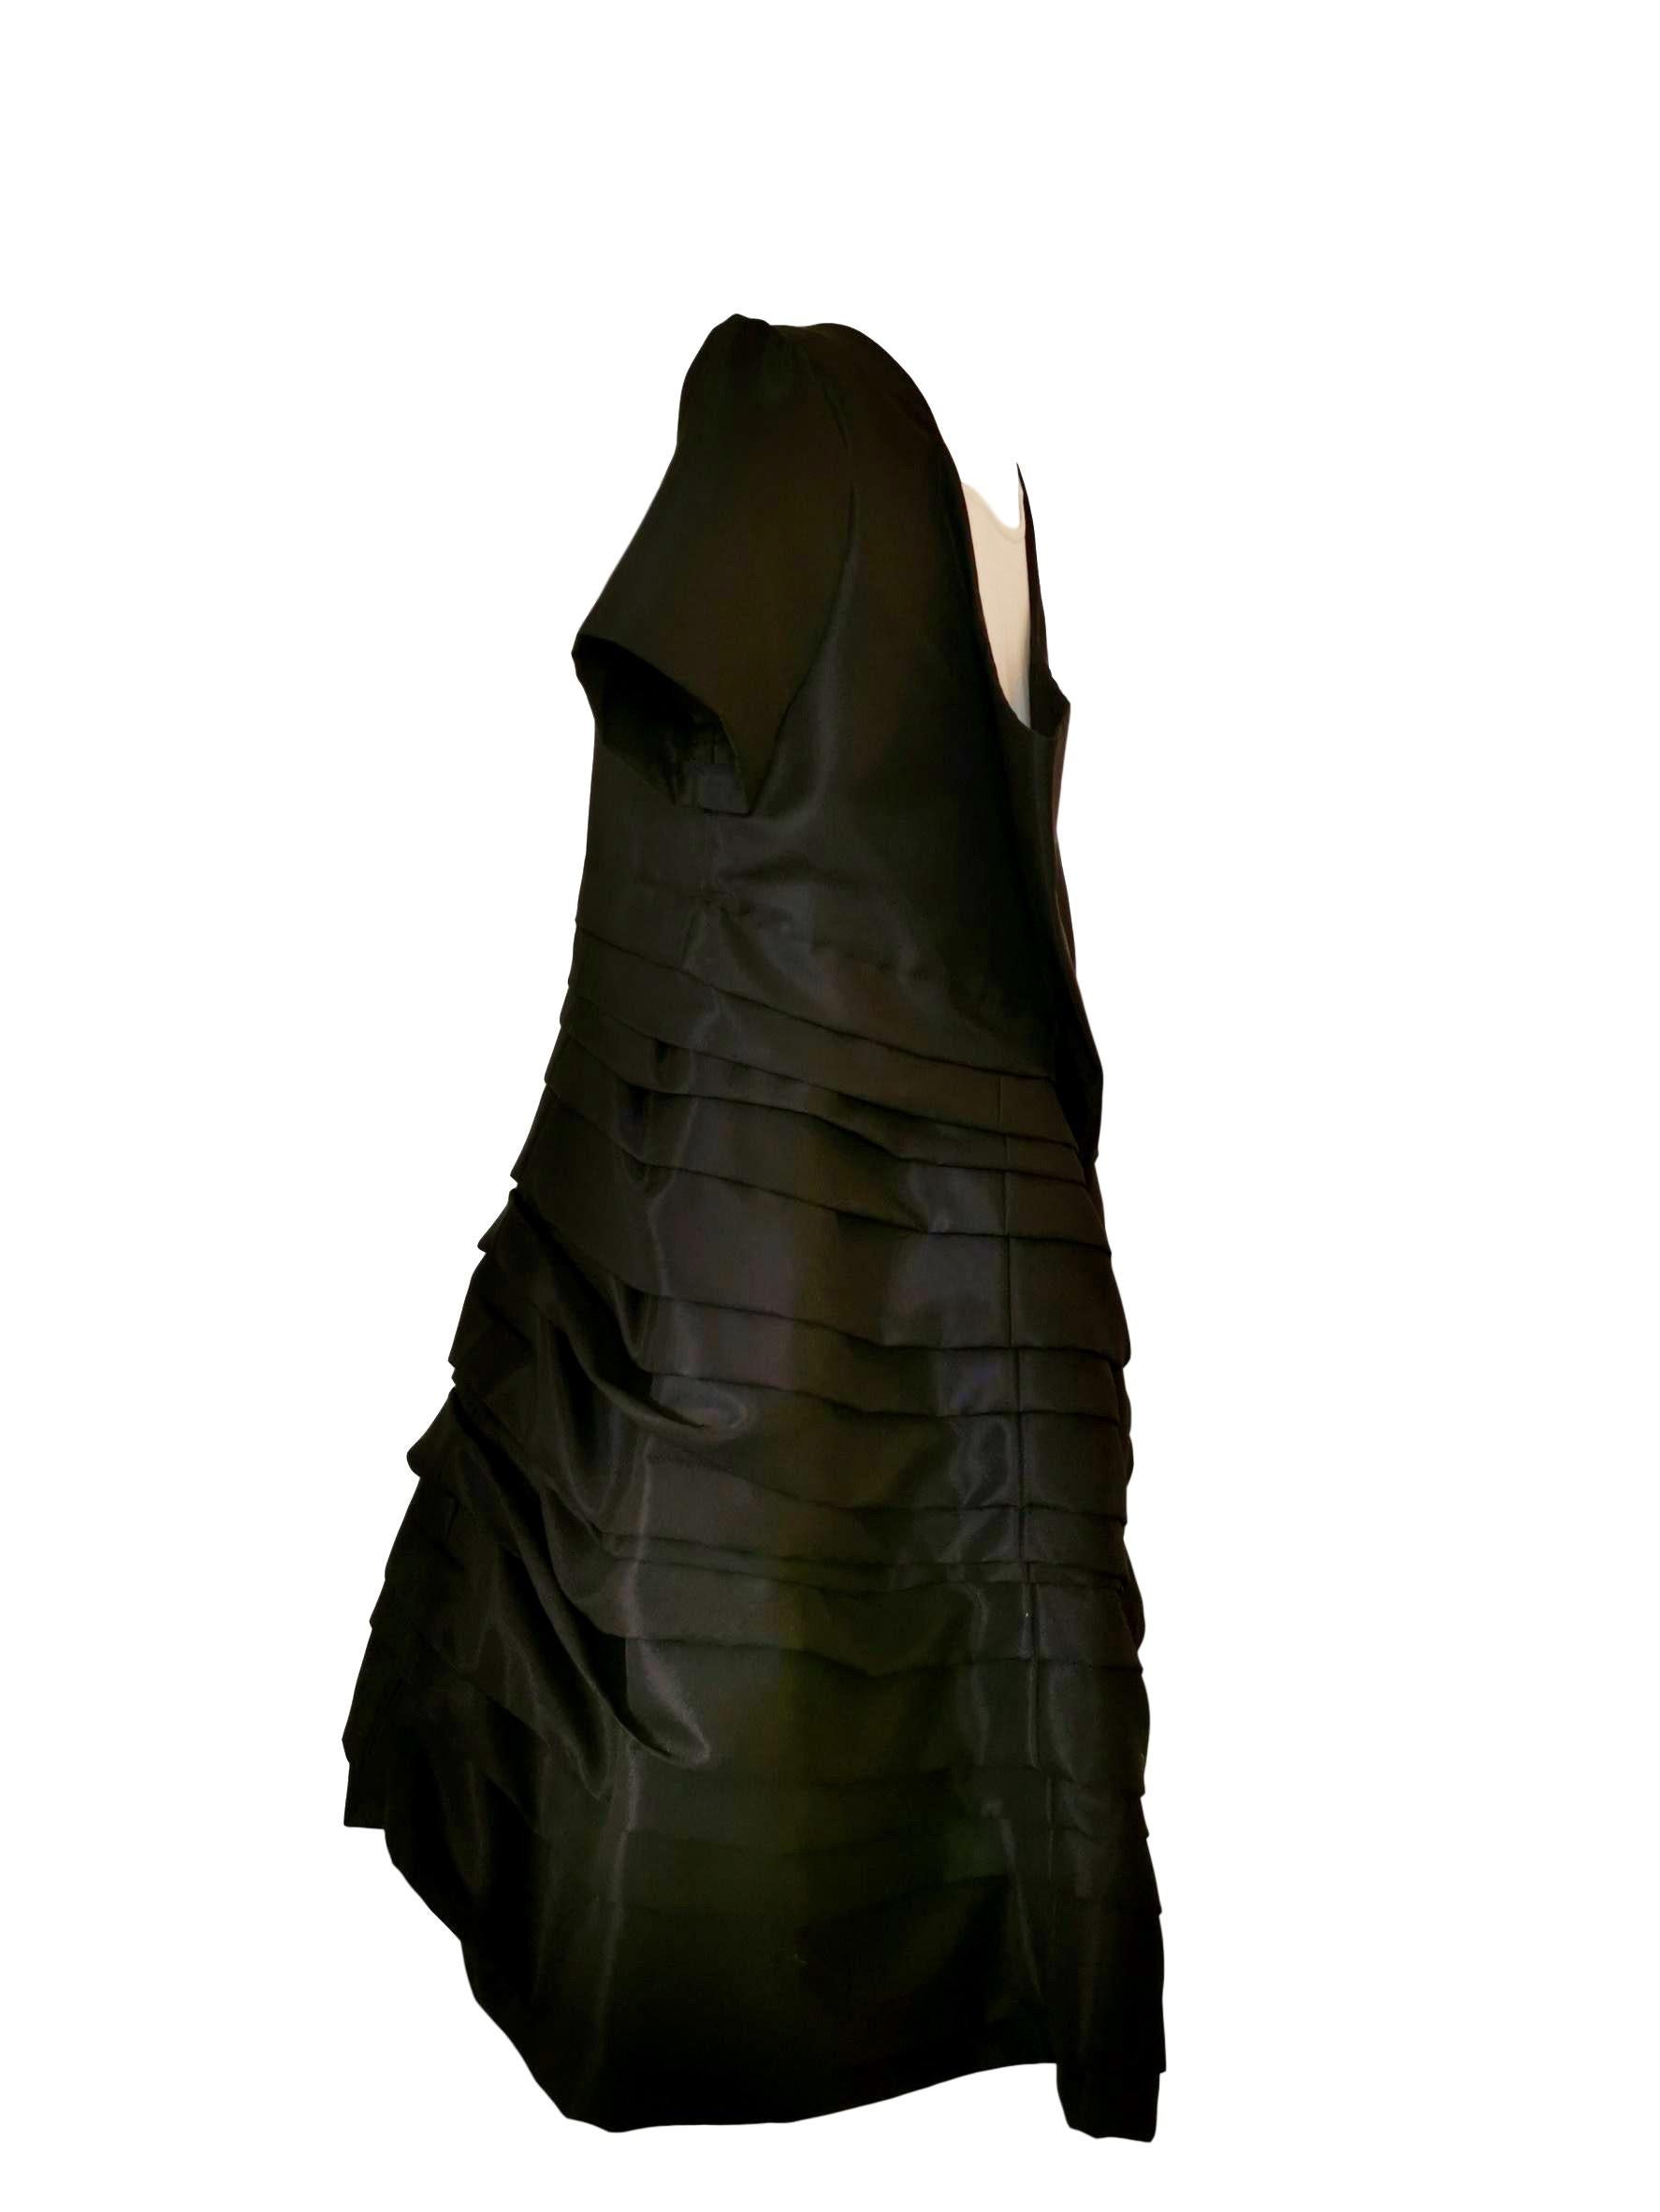 Comme des Garcons Horizontal Pleated Dress with Back Flap 1994 For Sale 4